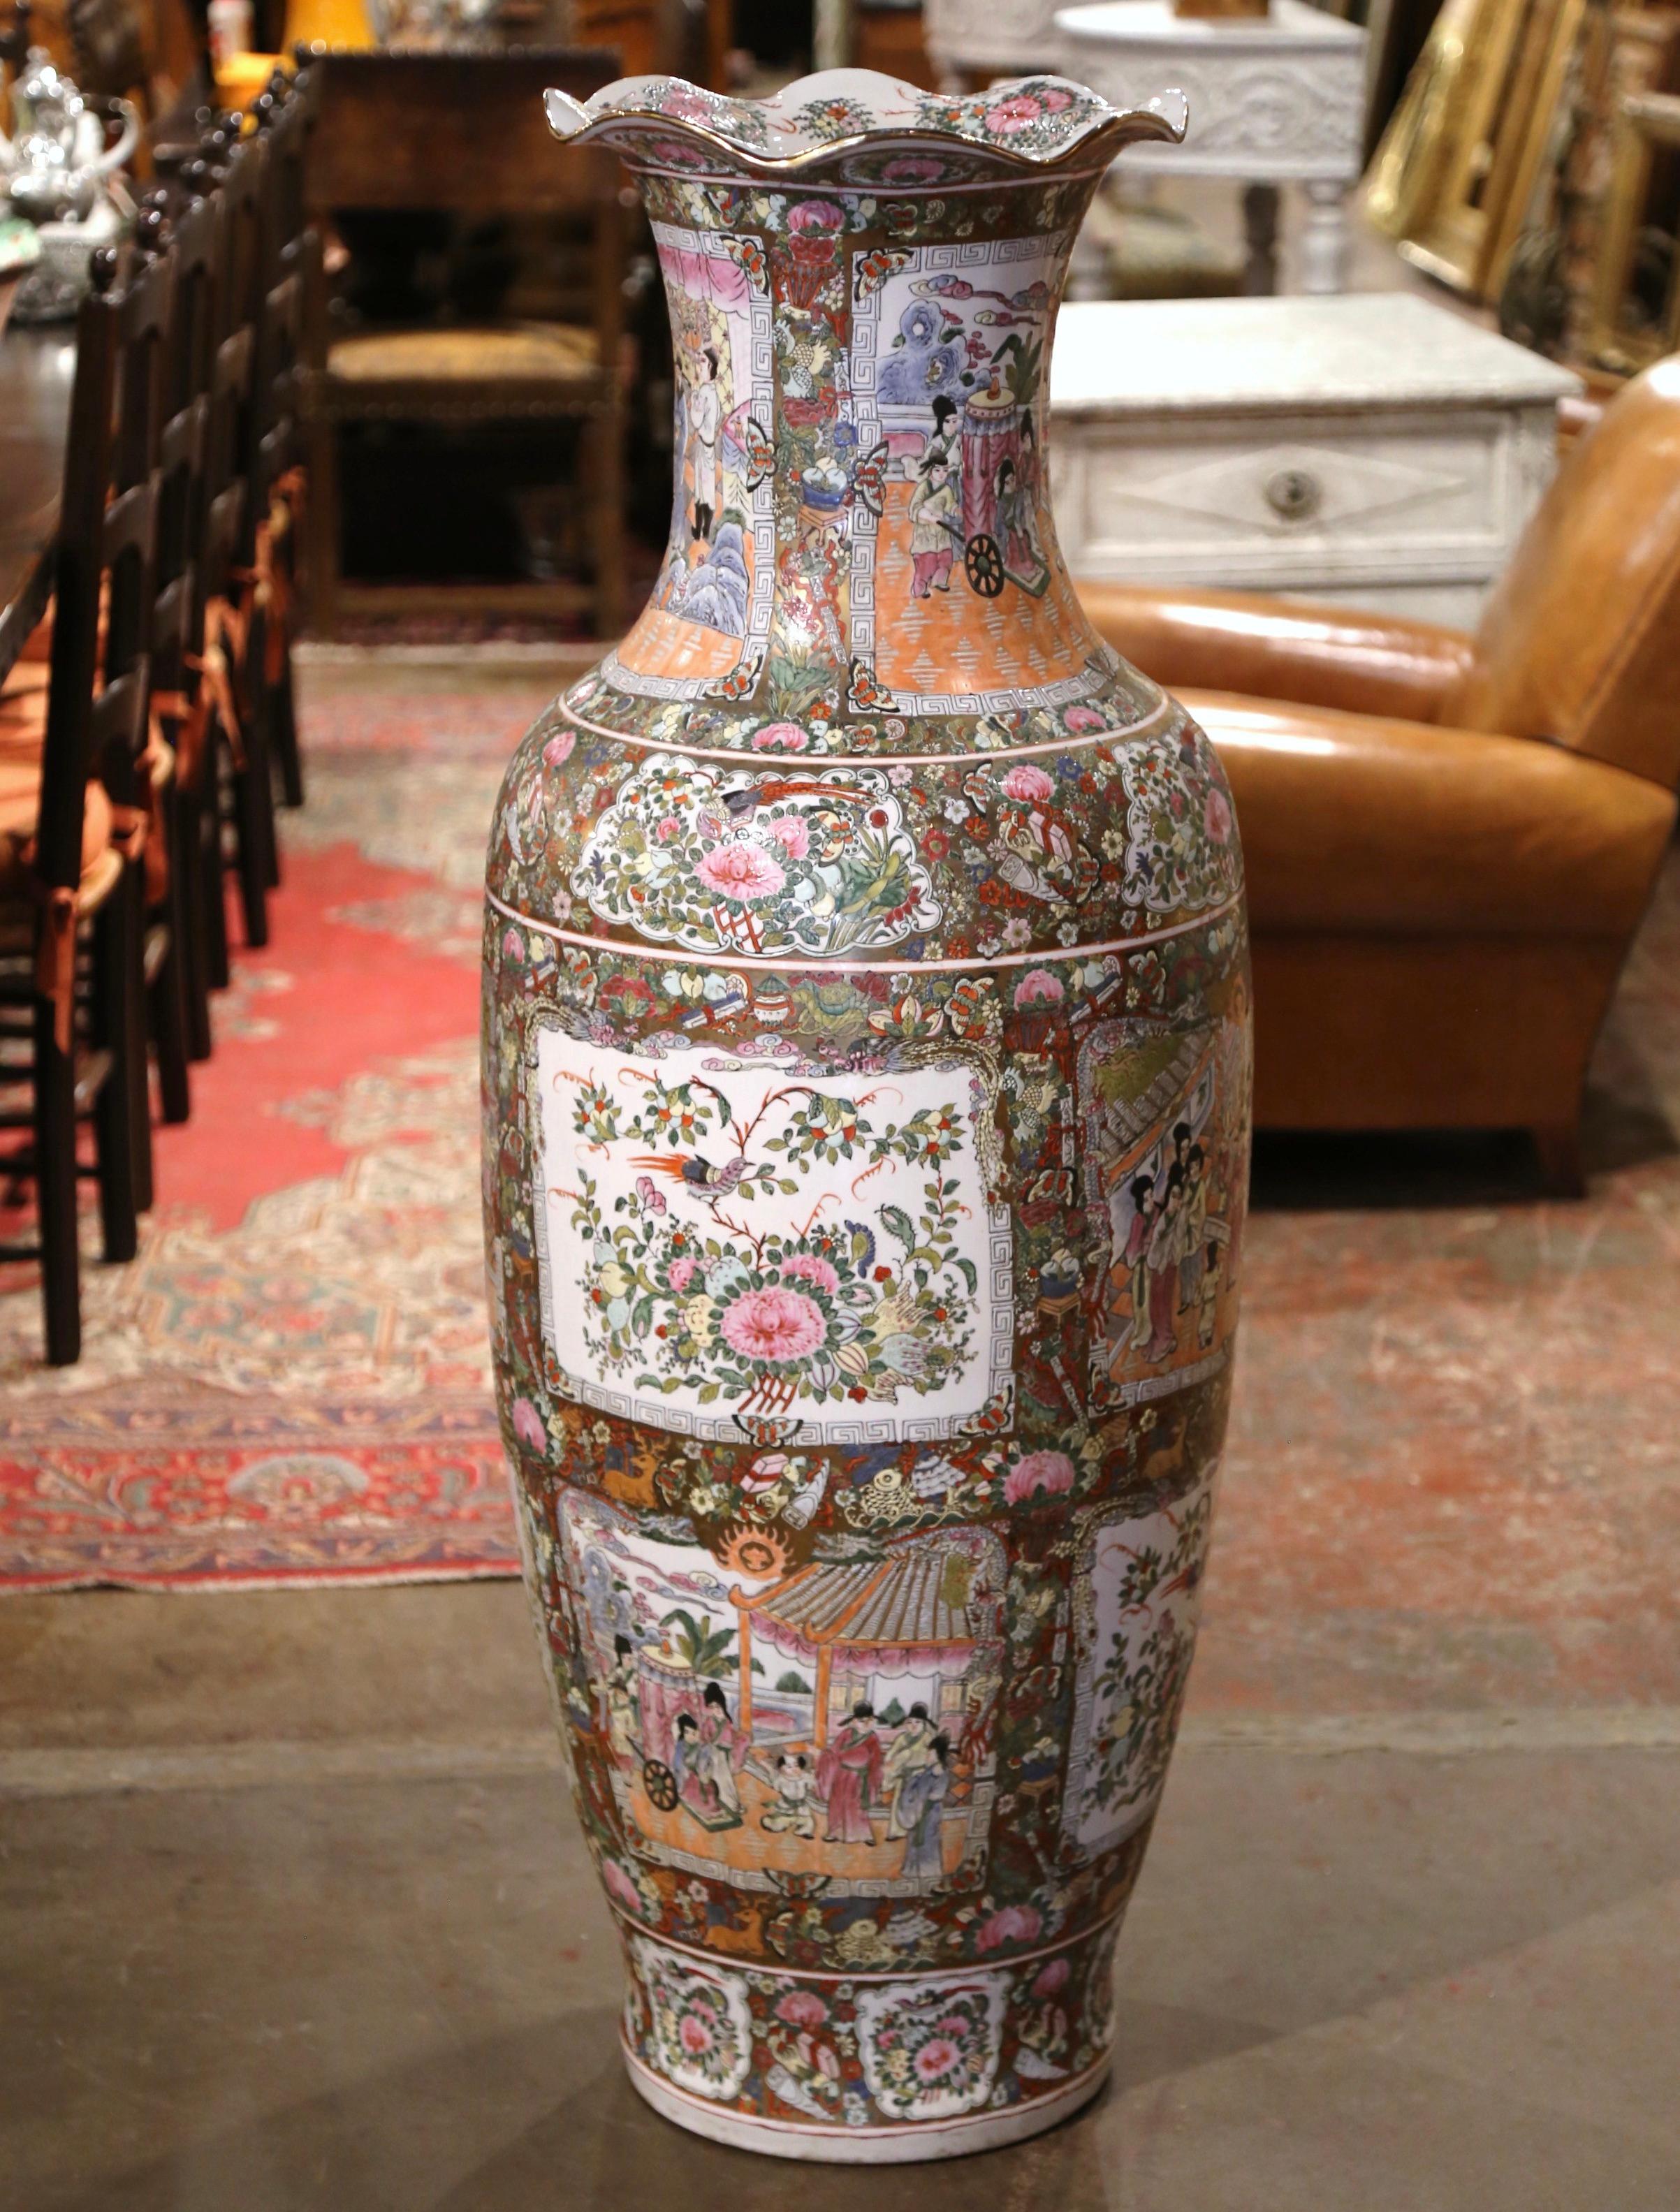 Decorate an entry or a room corner with this important colorful antique jar. Crafted in China circa 1950, the important Family Rose vase is round in shape decorated with a scalloped rim at the top. The tall vase is embellished with hand painted